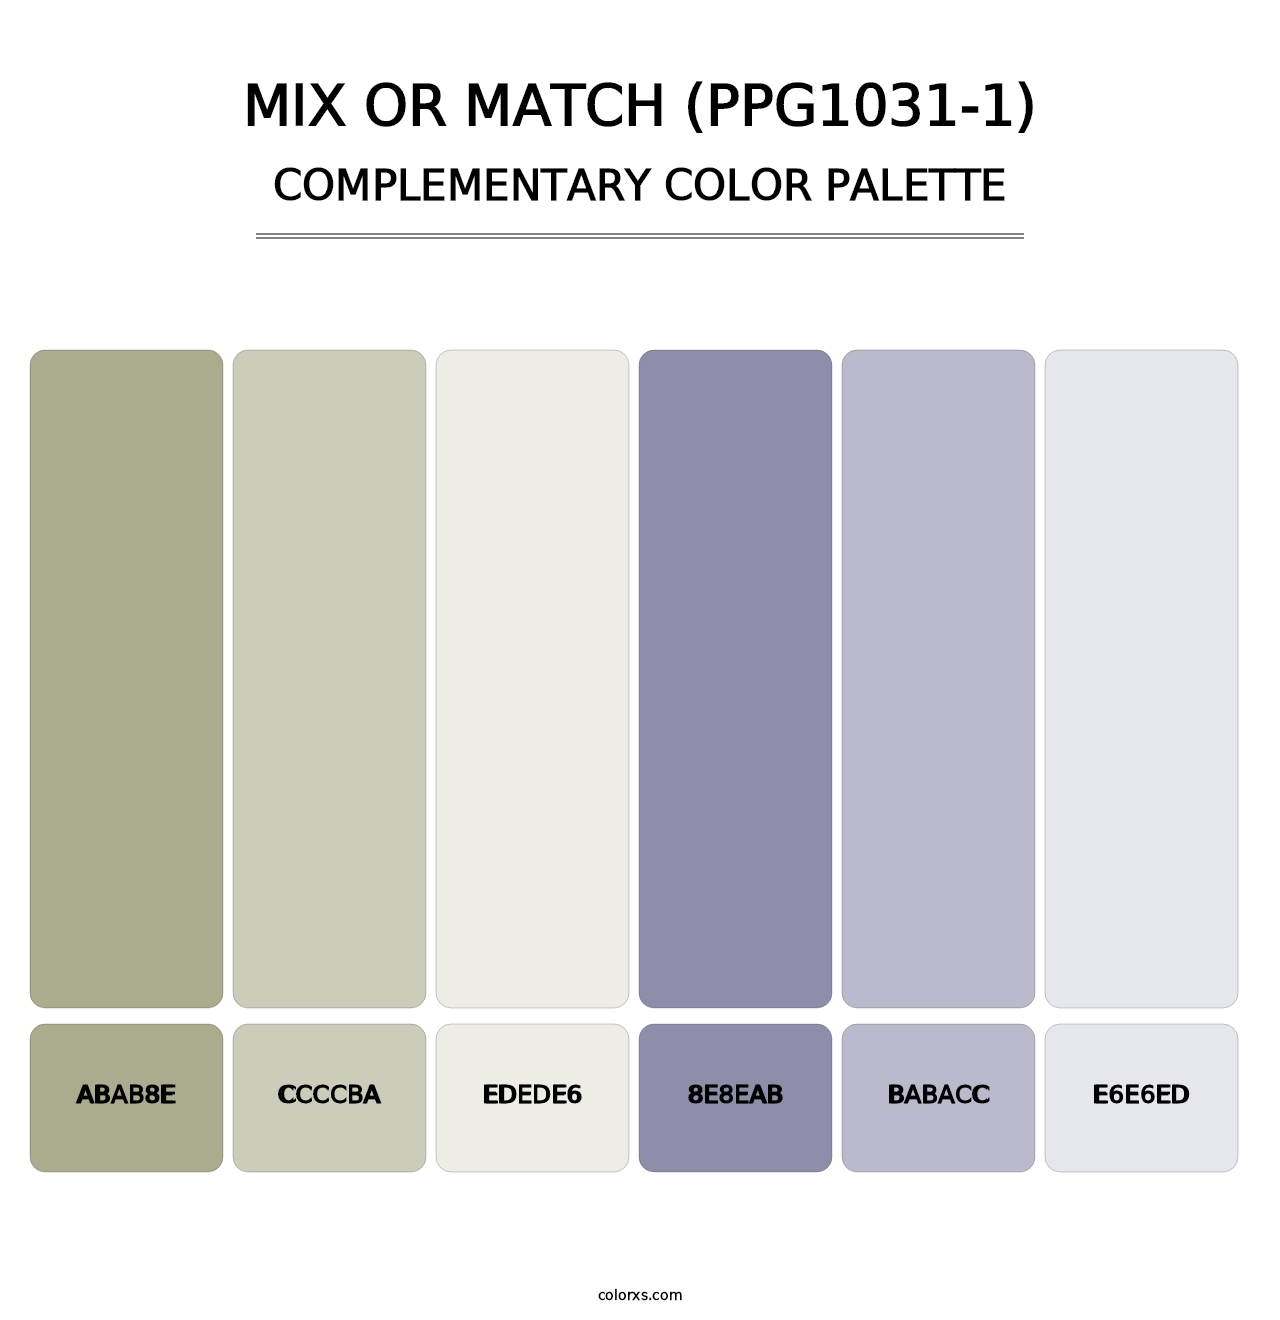 Mix Or Match (PPG1031-1) - Complementary Color Palette